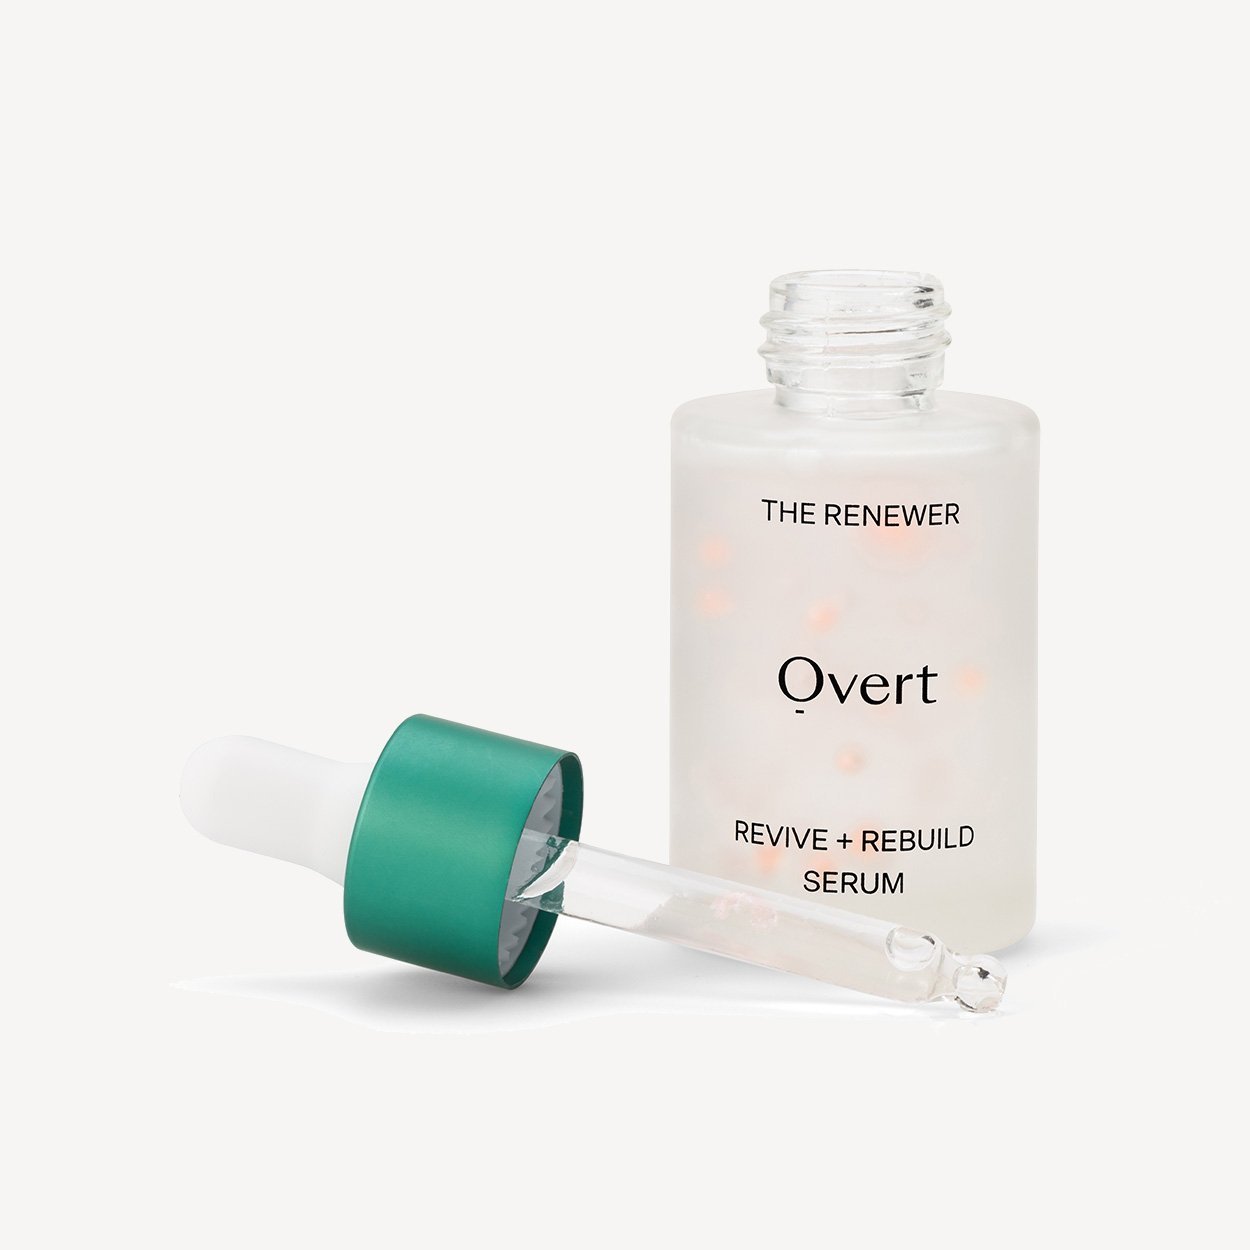 The Renewer by Overt